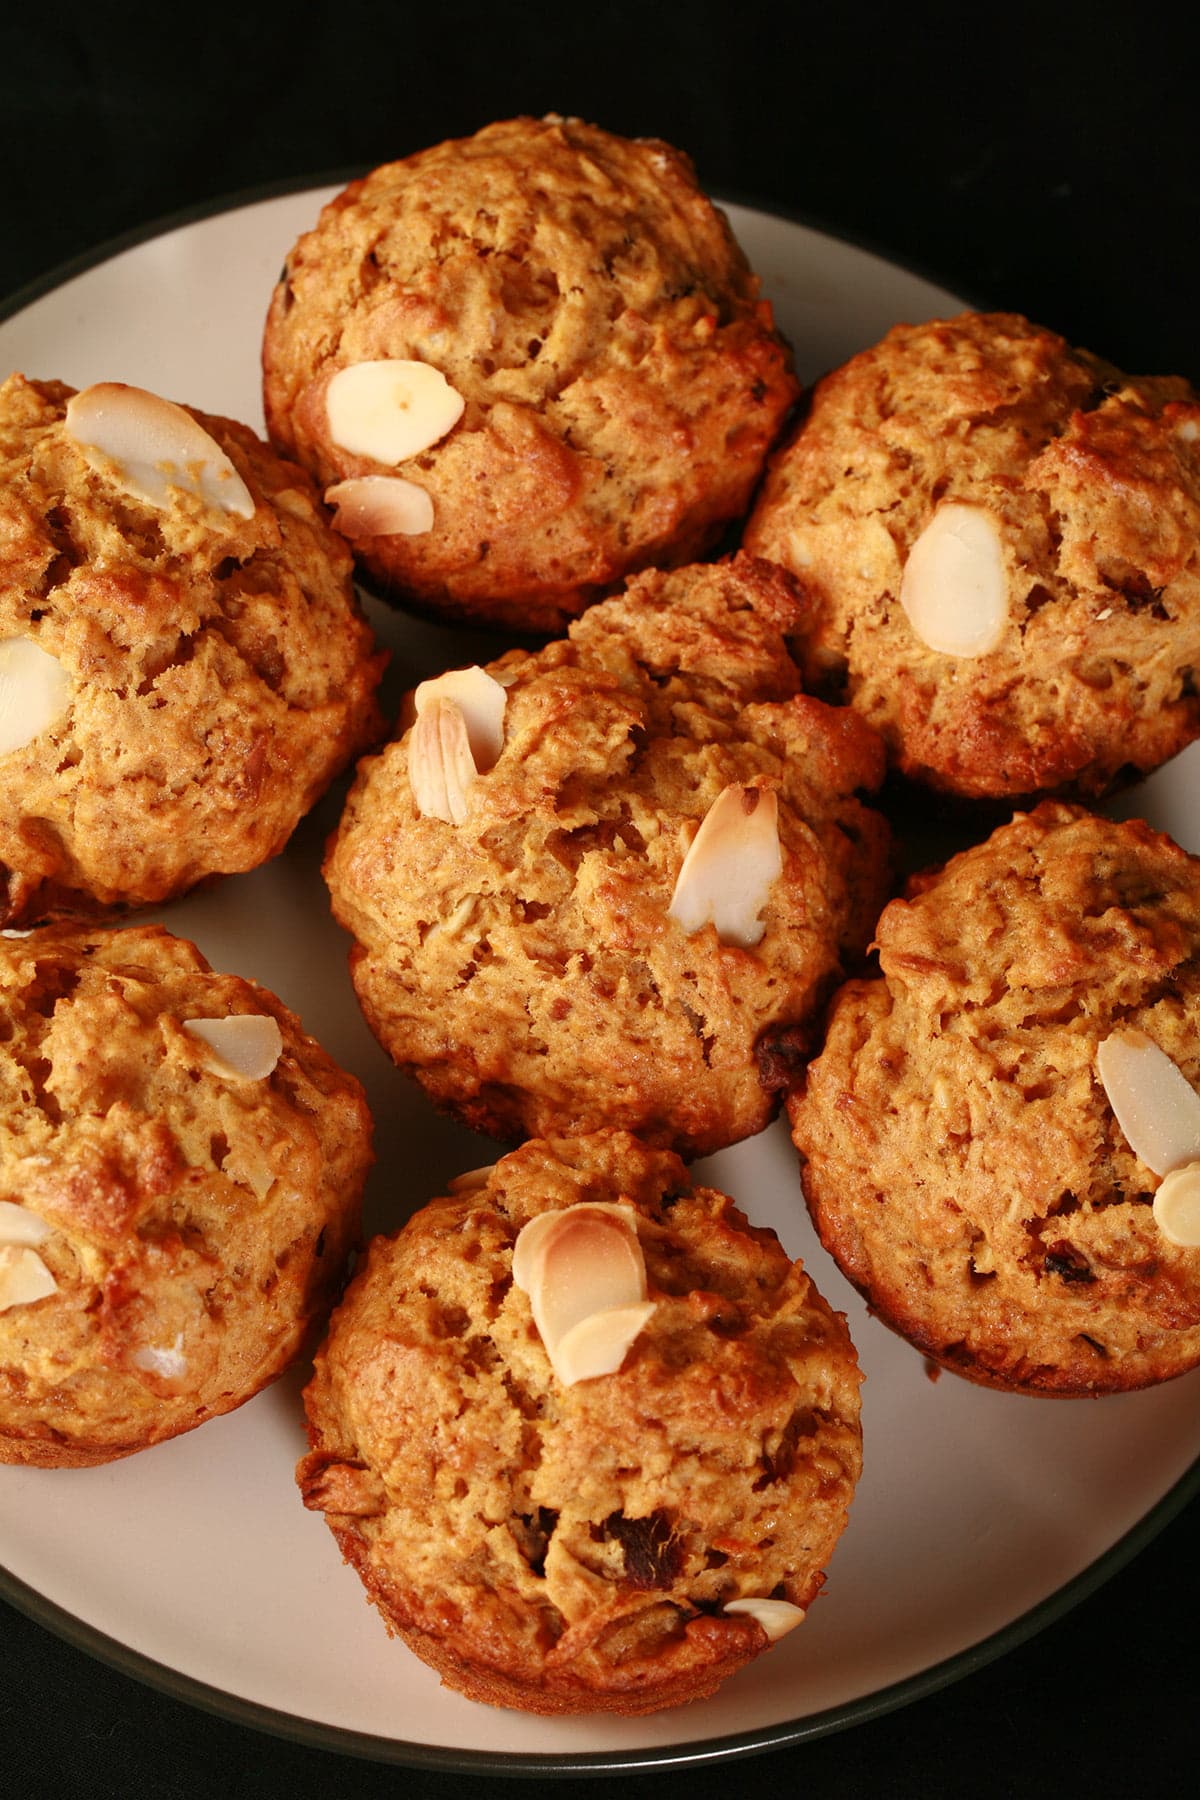 A plate of orange date and almond muffins. They are an orangey brown colour, with slices of almonds and chunks of dates visible throughout.